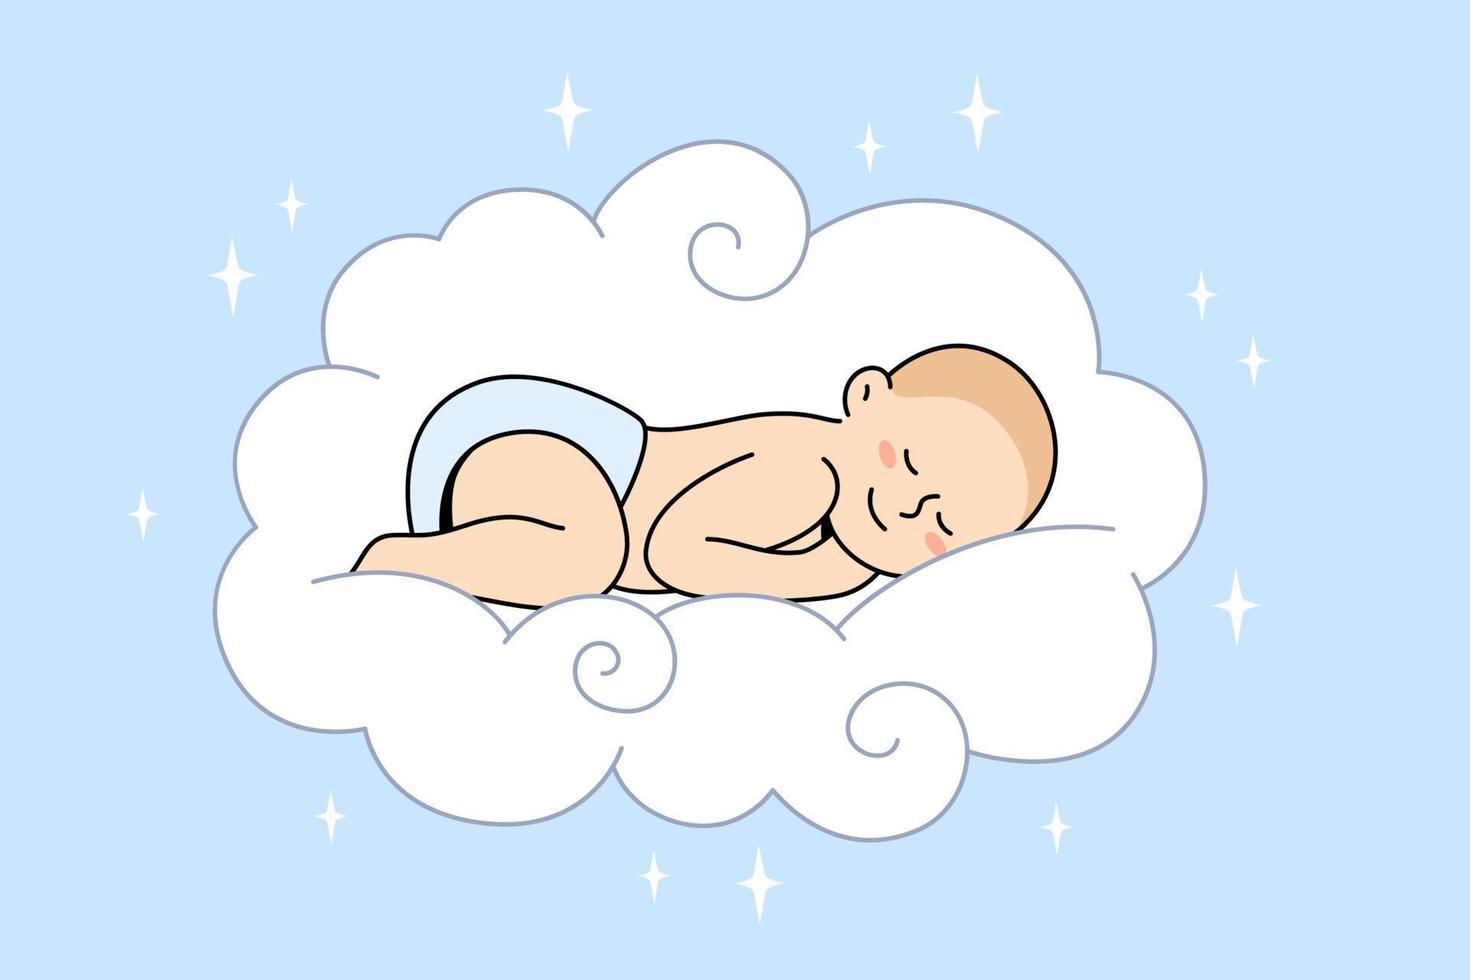 Happy childhood and sweet dreams concept. Small baby infant sleeping like angel in sweet white fluffy cloud having sweet dreams vector illustration